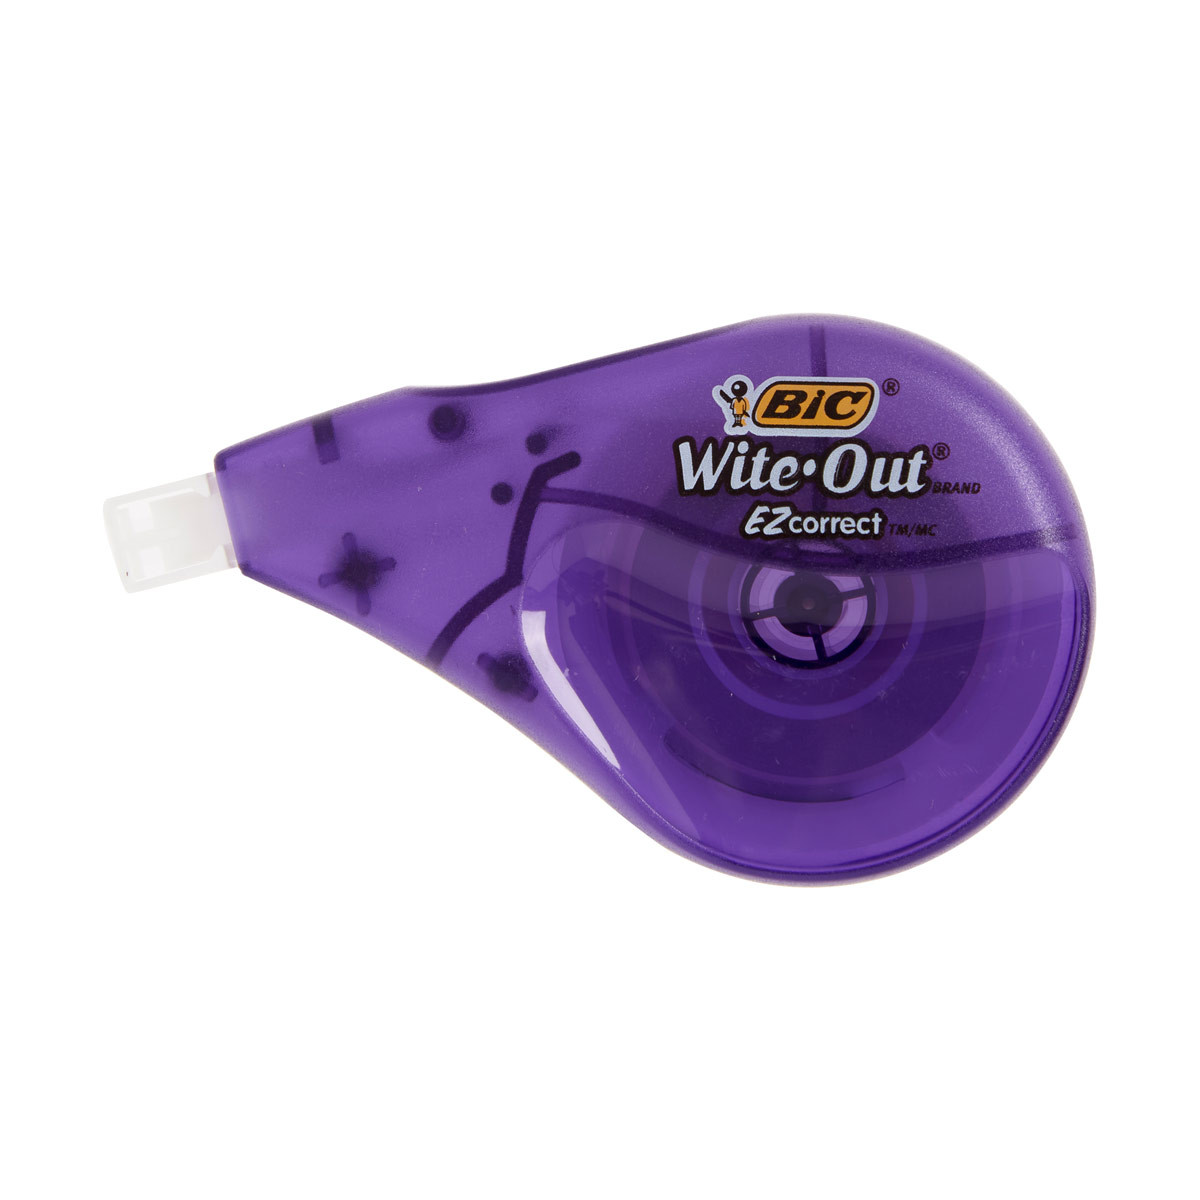 BIC Wite-Out Brand EZ Correct Correction Tape - Applies Dry, White, Clean &  Easy To Use, Tear-Resistant Tape, 4-Count, Dispenser colors may vary